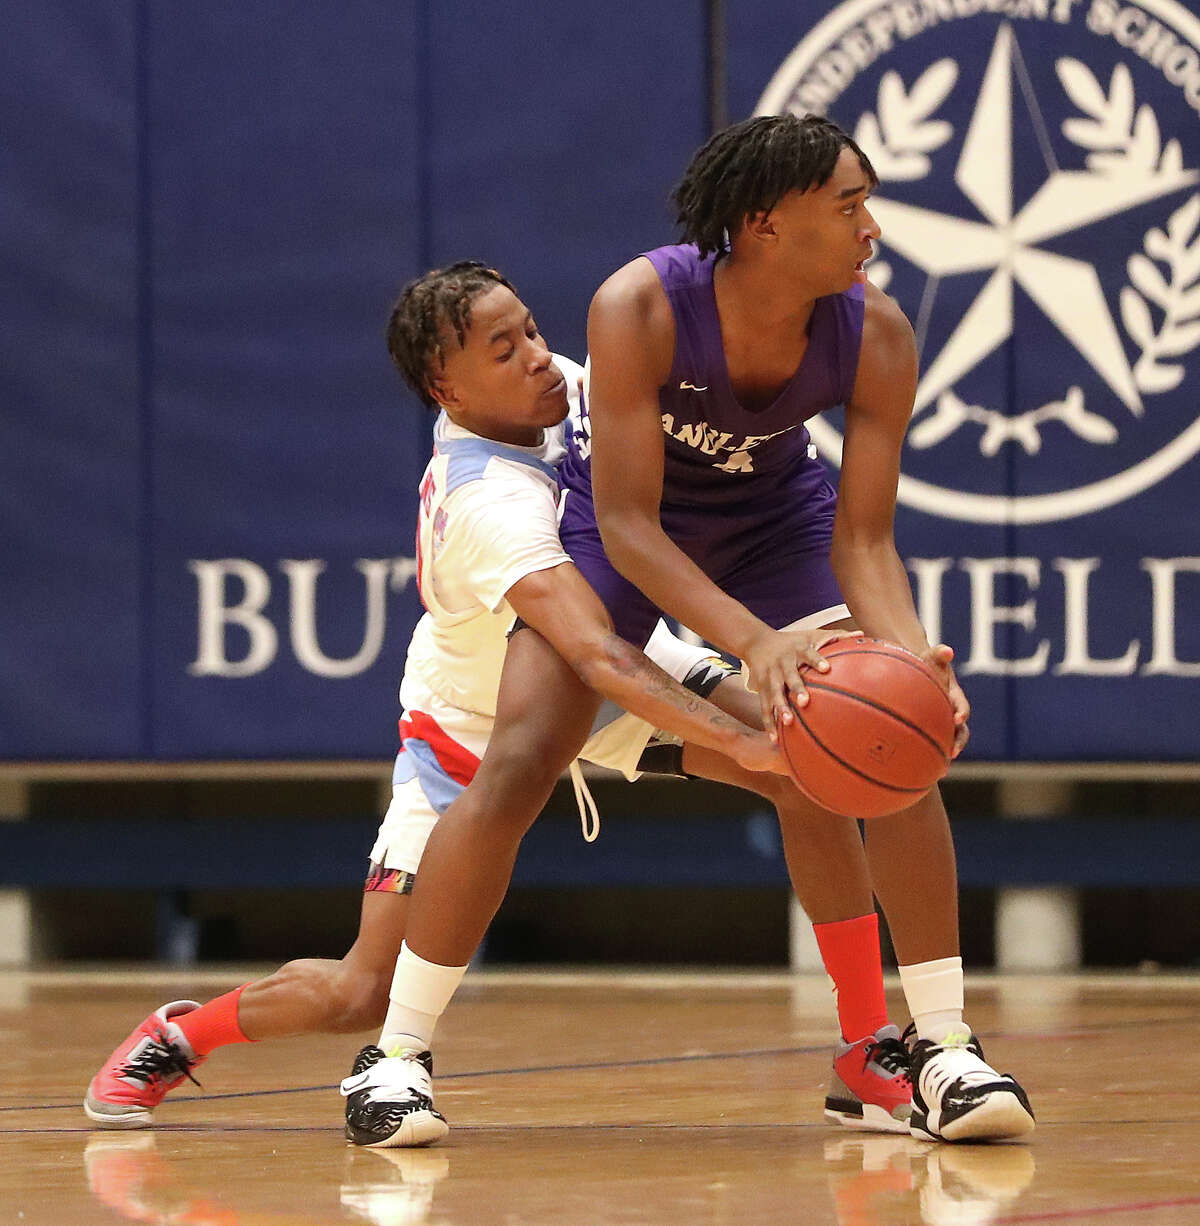 Angleton High School's Majestic Ford (0) battles against Madison High School's Gerald Harper (20) during the second half of a Region III-5A bi-district boys basketball playoff game at Butler Fieldhouse on Monday, Feb. 21, 2022 in Houston.